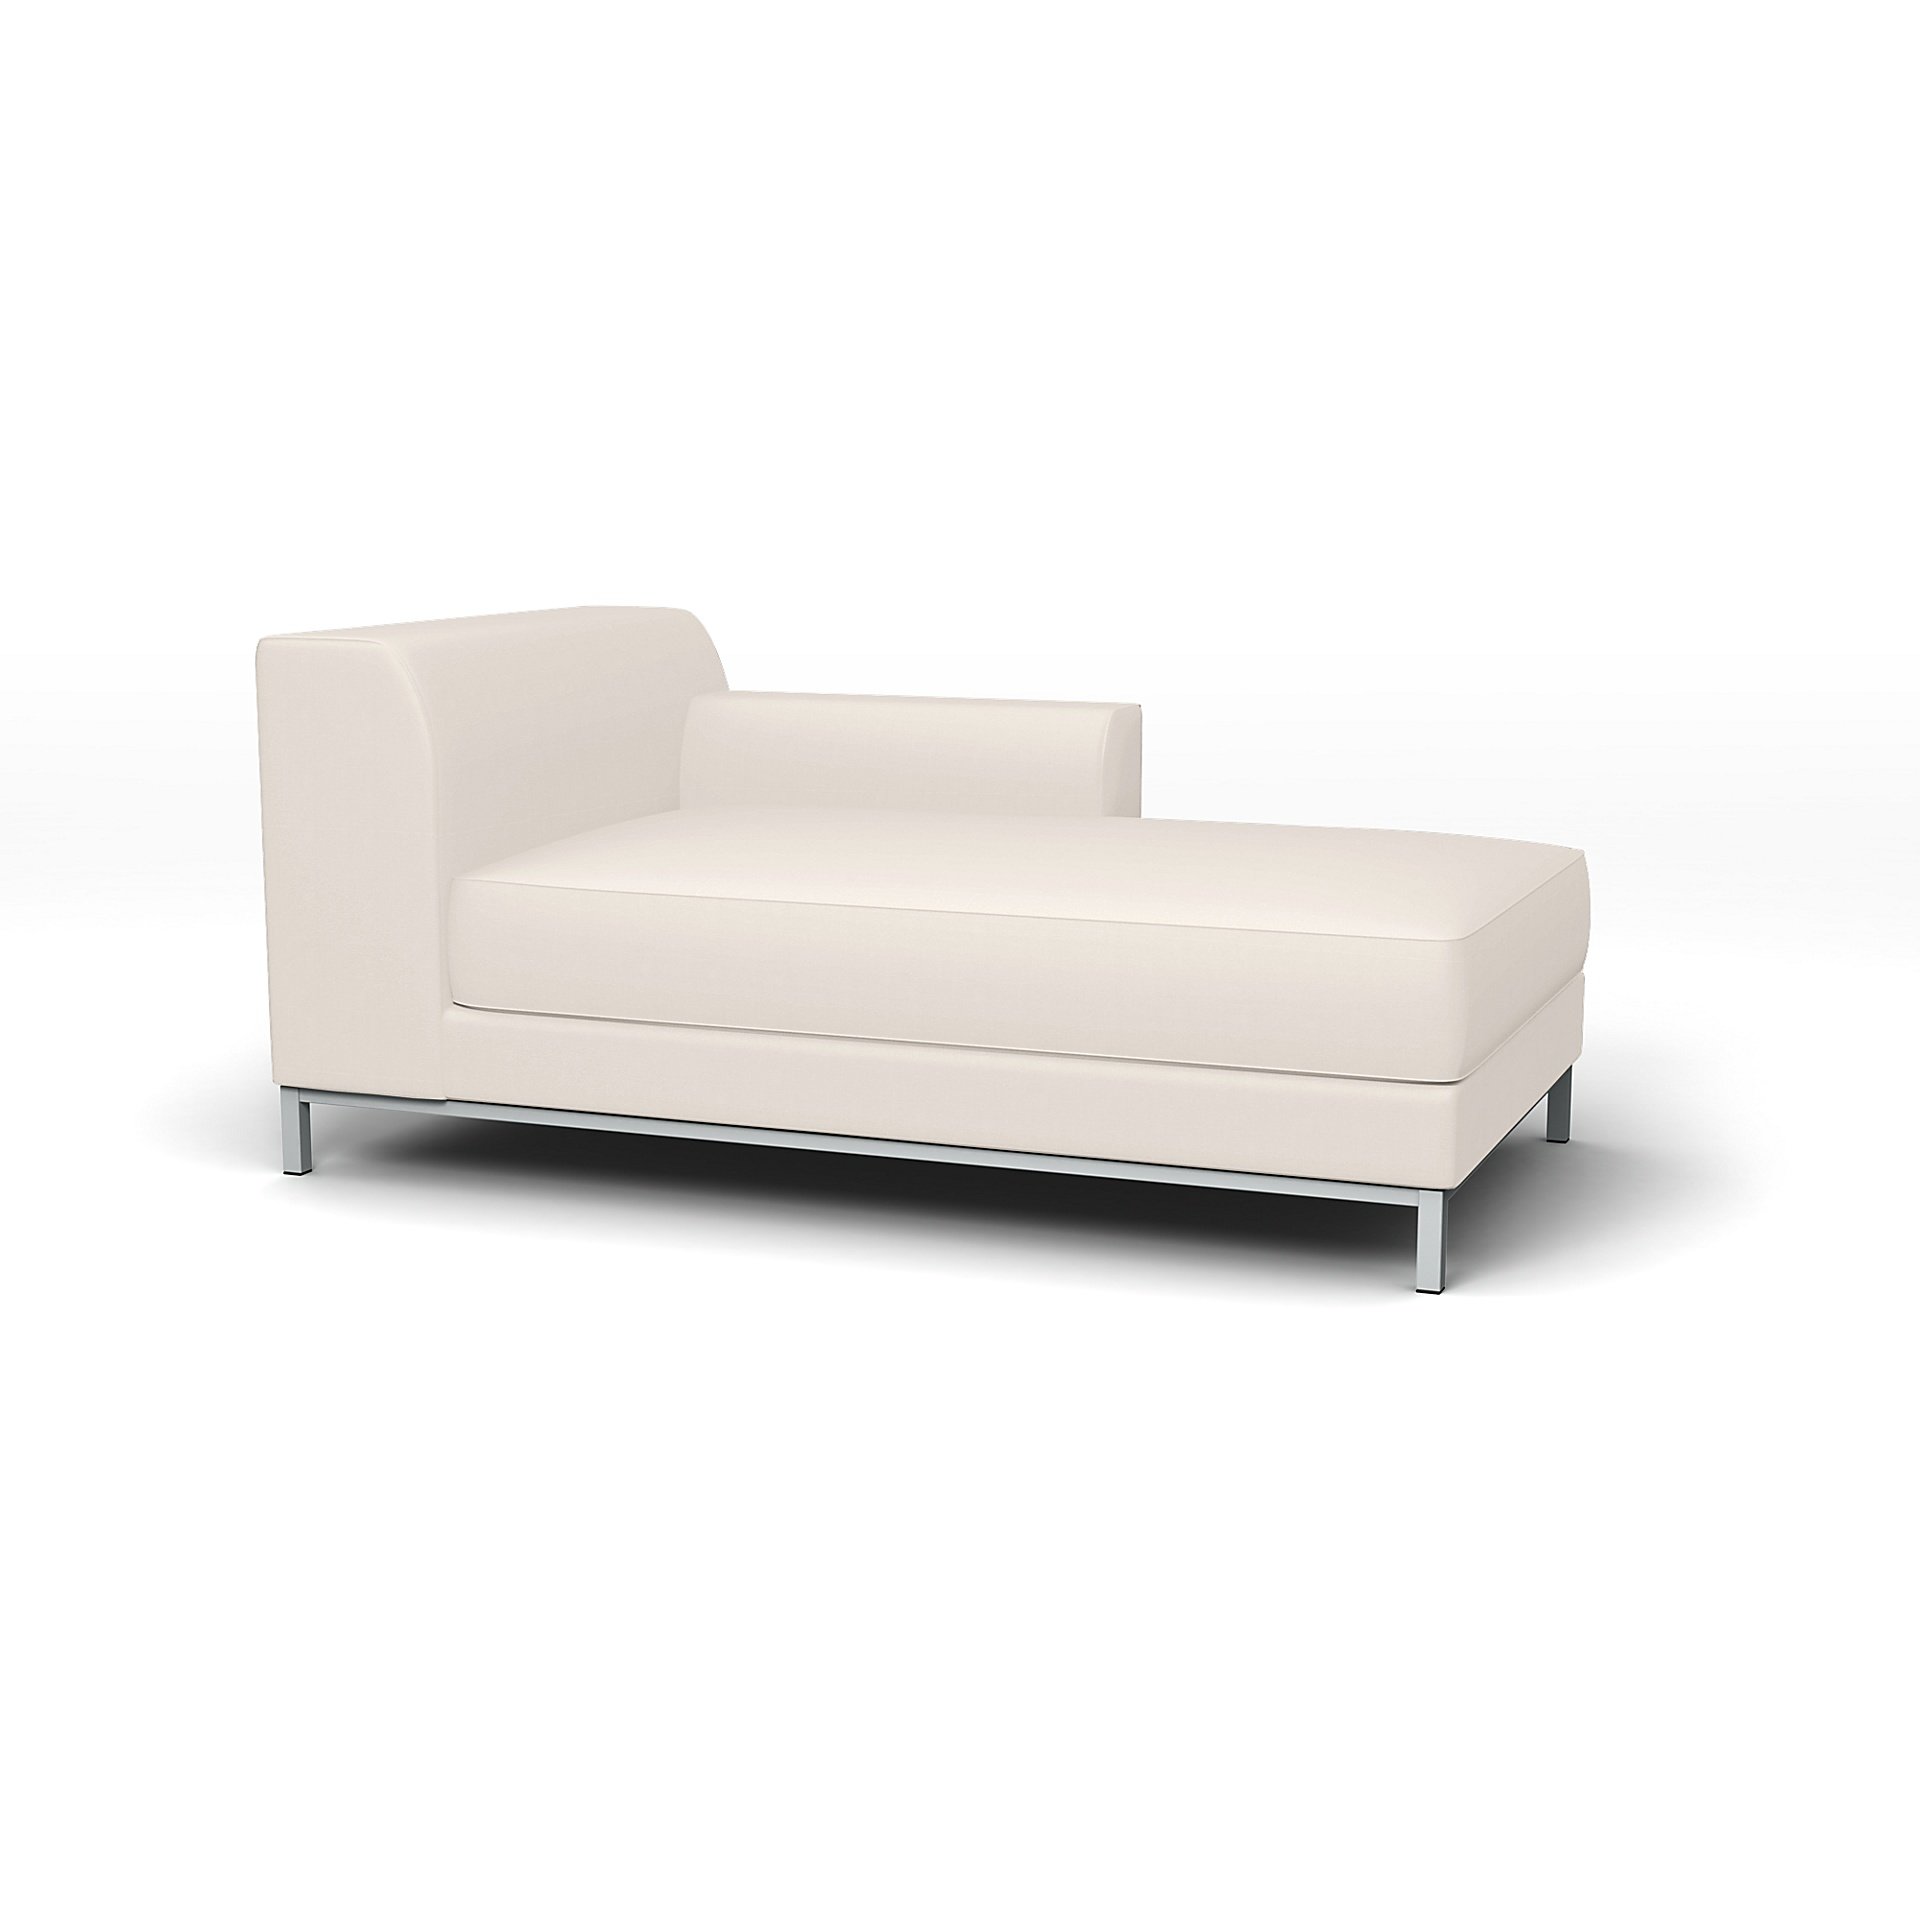 IKEA - Kramfors Chaise Longue with Right Arm Cover, Soft White, Cotton - Bemz